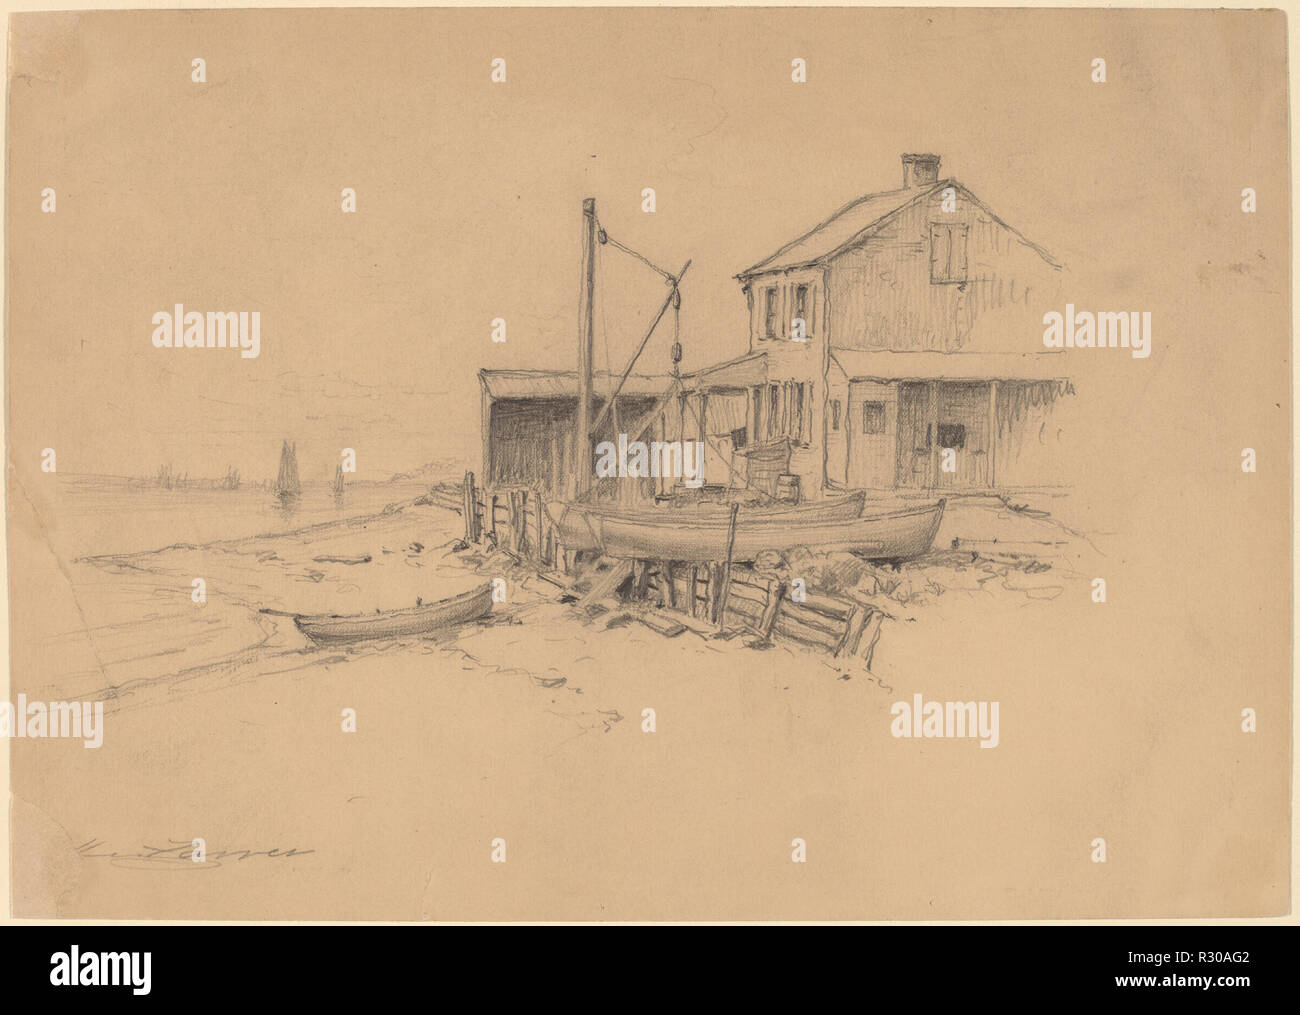 Fishing Boats and Shack. Dimensions: overall: 20 x 28.2 cm (7 7/8 x 11 1/8 in.). Medium: graphite on wove paper. Museum: National Gallery of Art, Washington DC. Author: Henry Farrer. Stock Photo